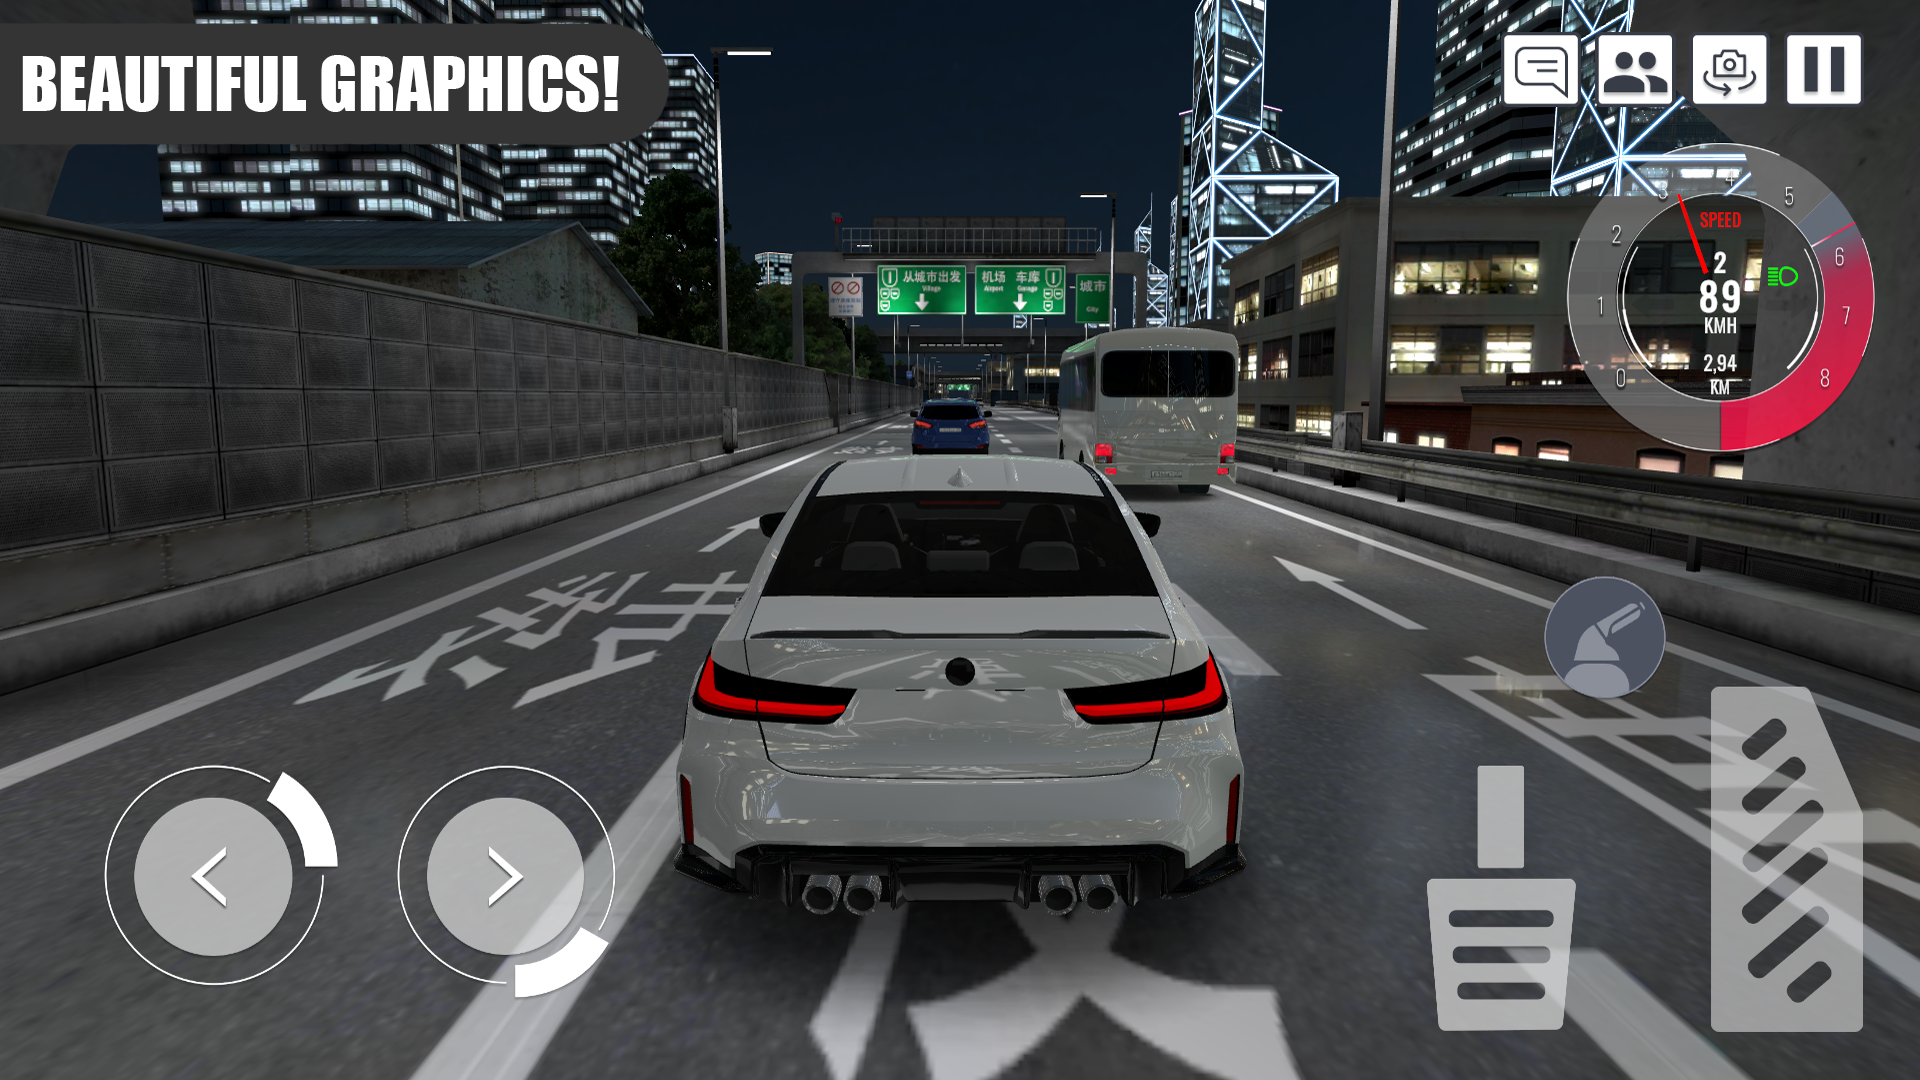 Download Car Racing Game - Car Games 3D on PC with MEmu